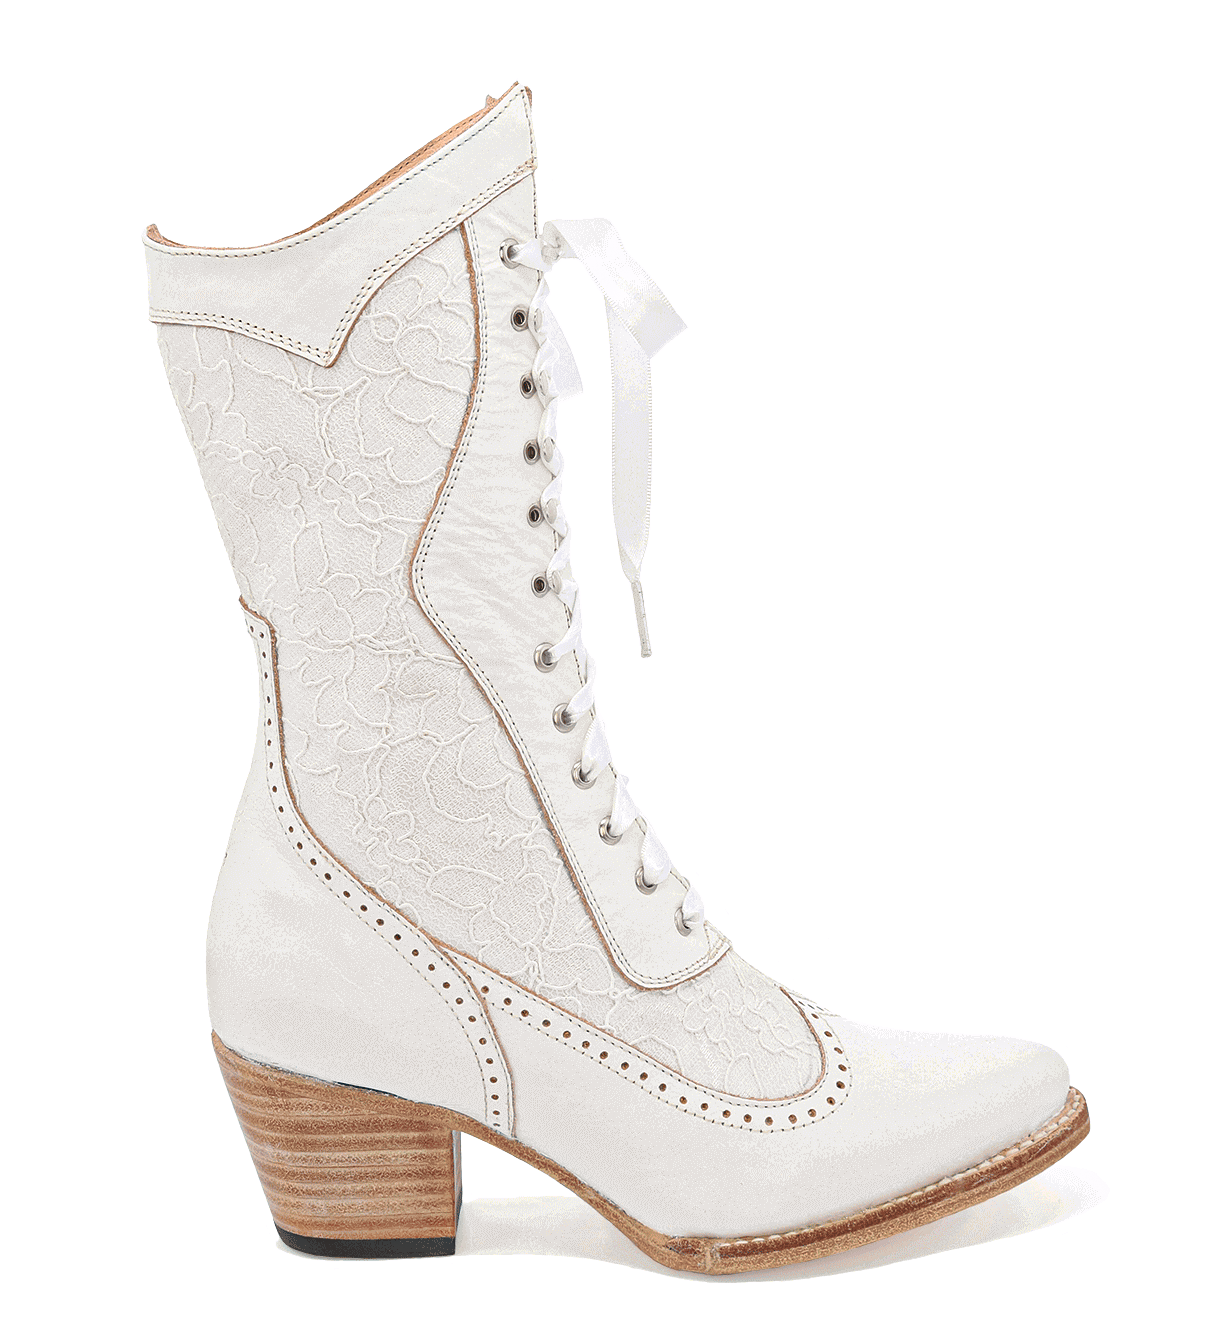 A seductive Oak Tree Farms Biddy lace-up boot with a wooden heel.